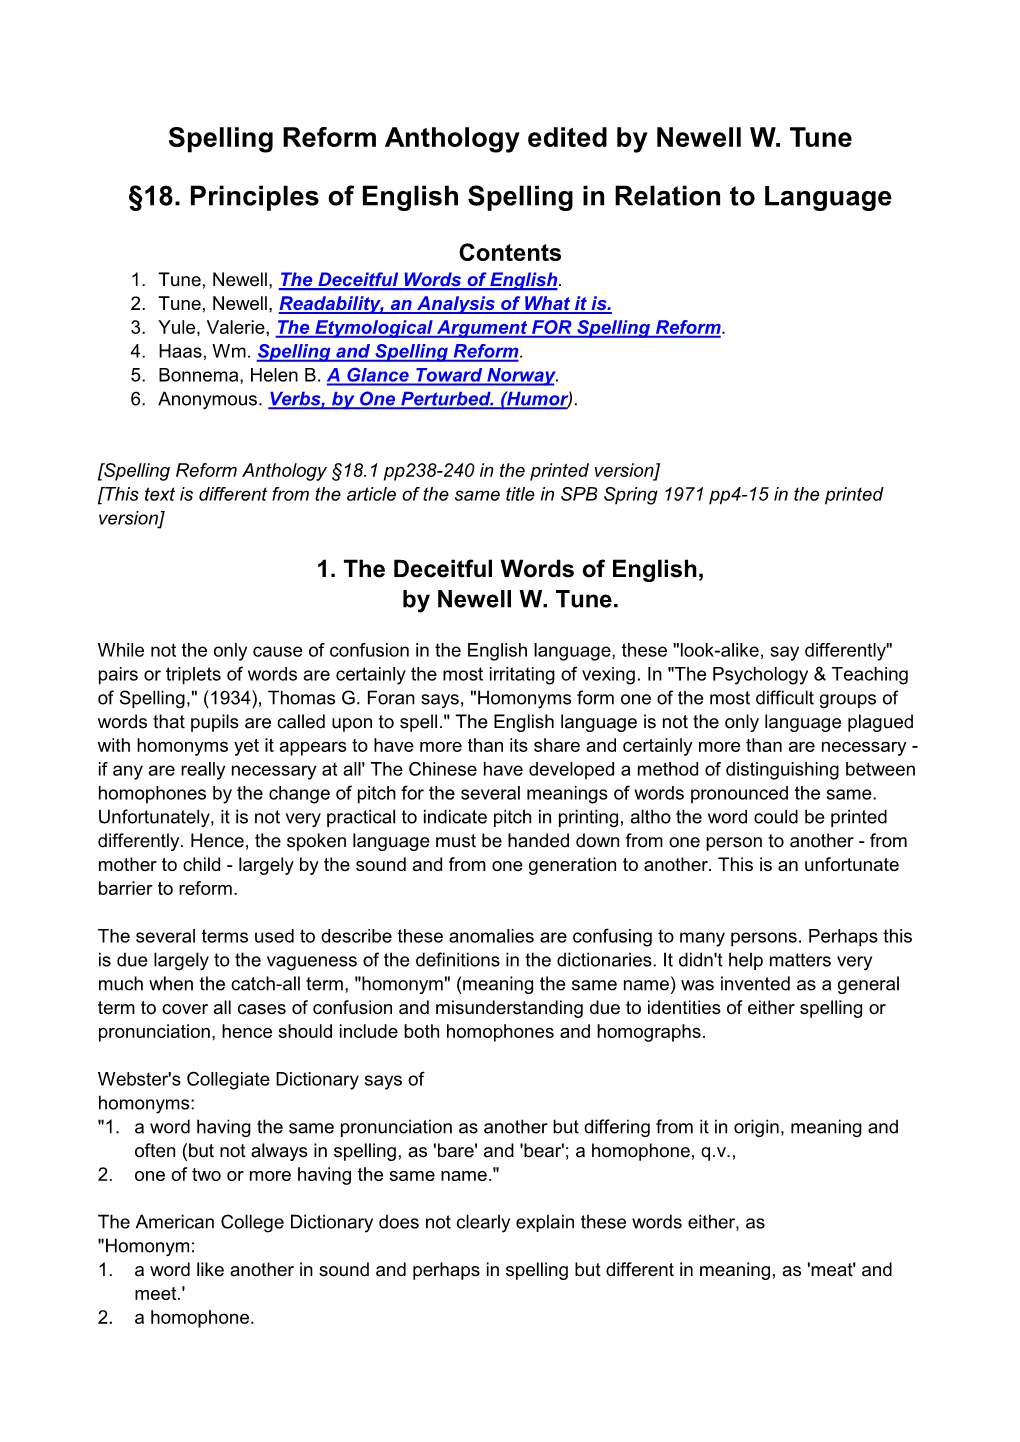 18. Principles of English Spelling in Relation to Language